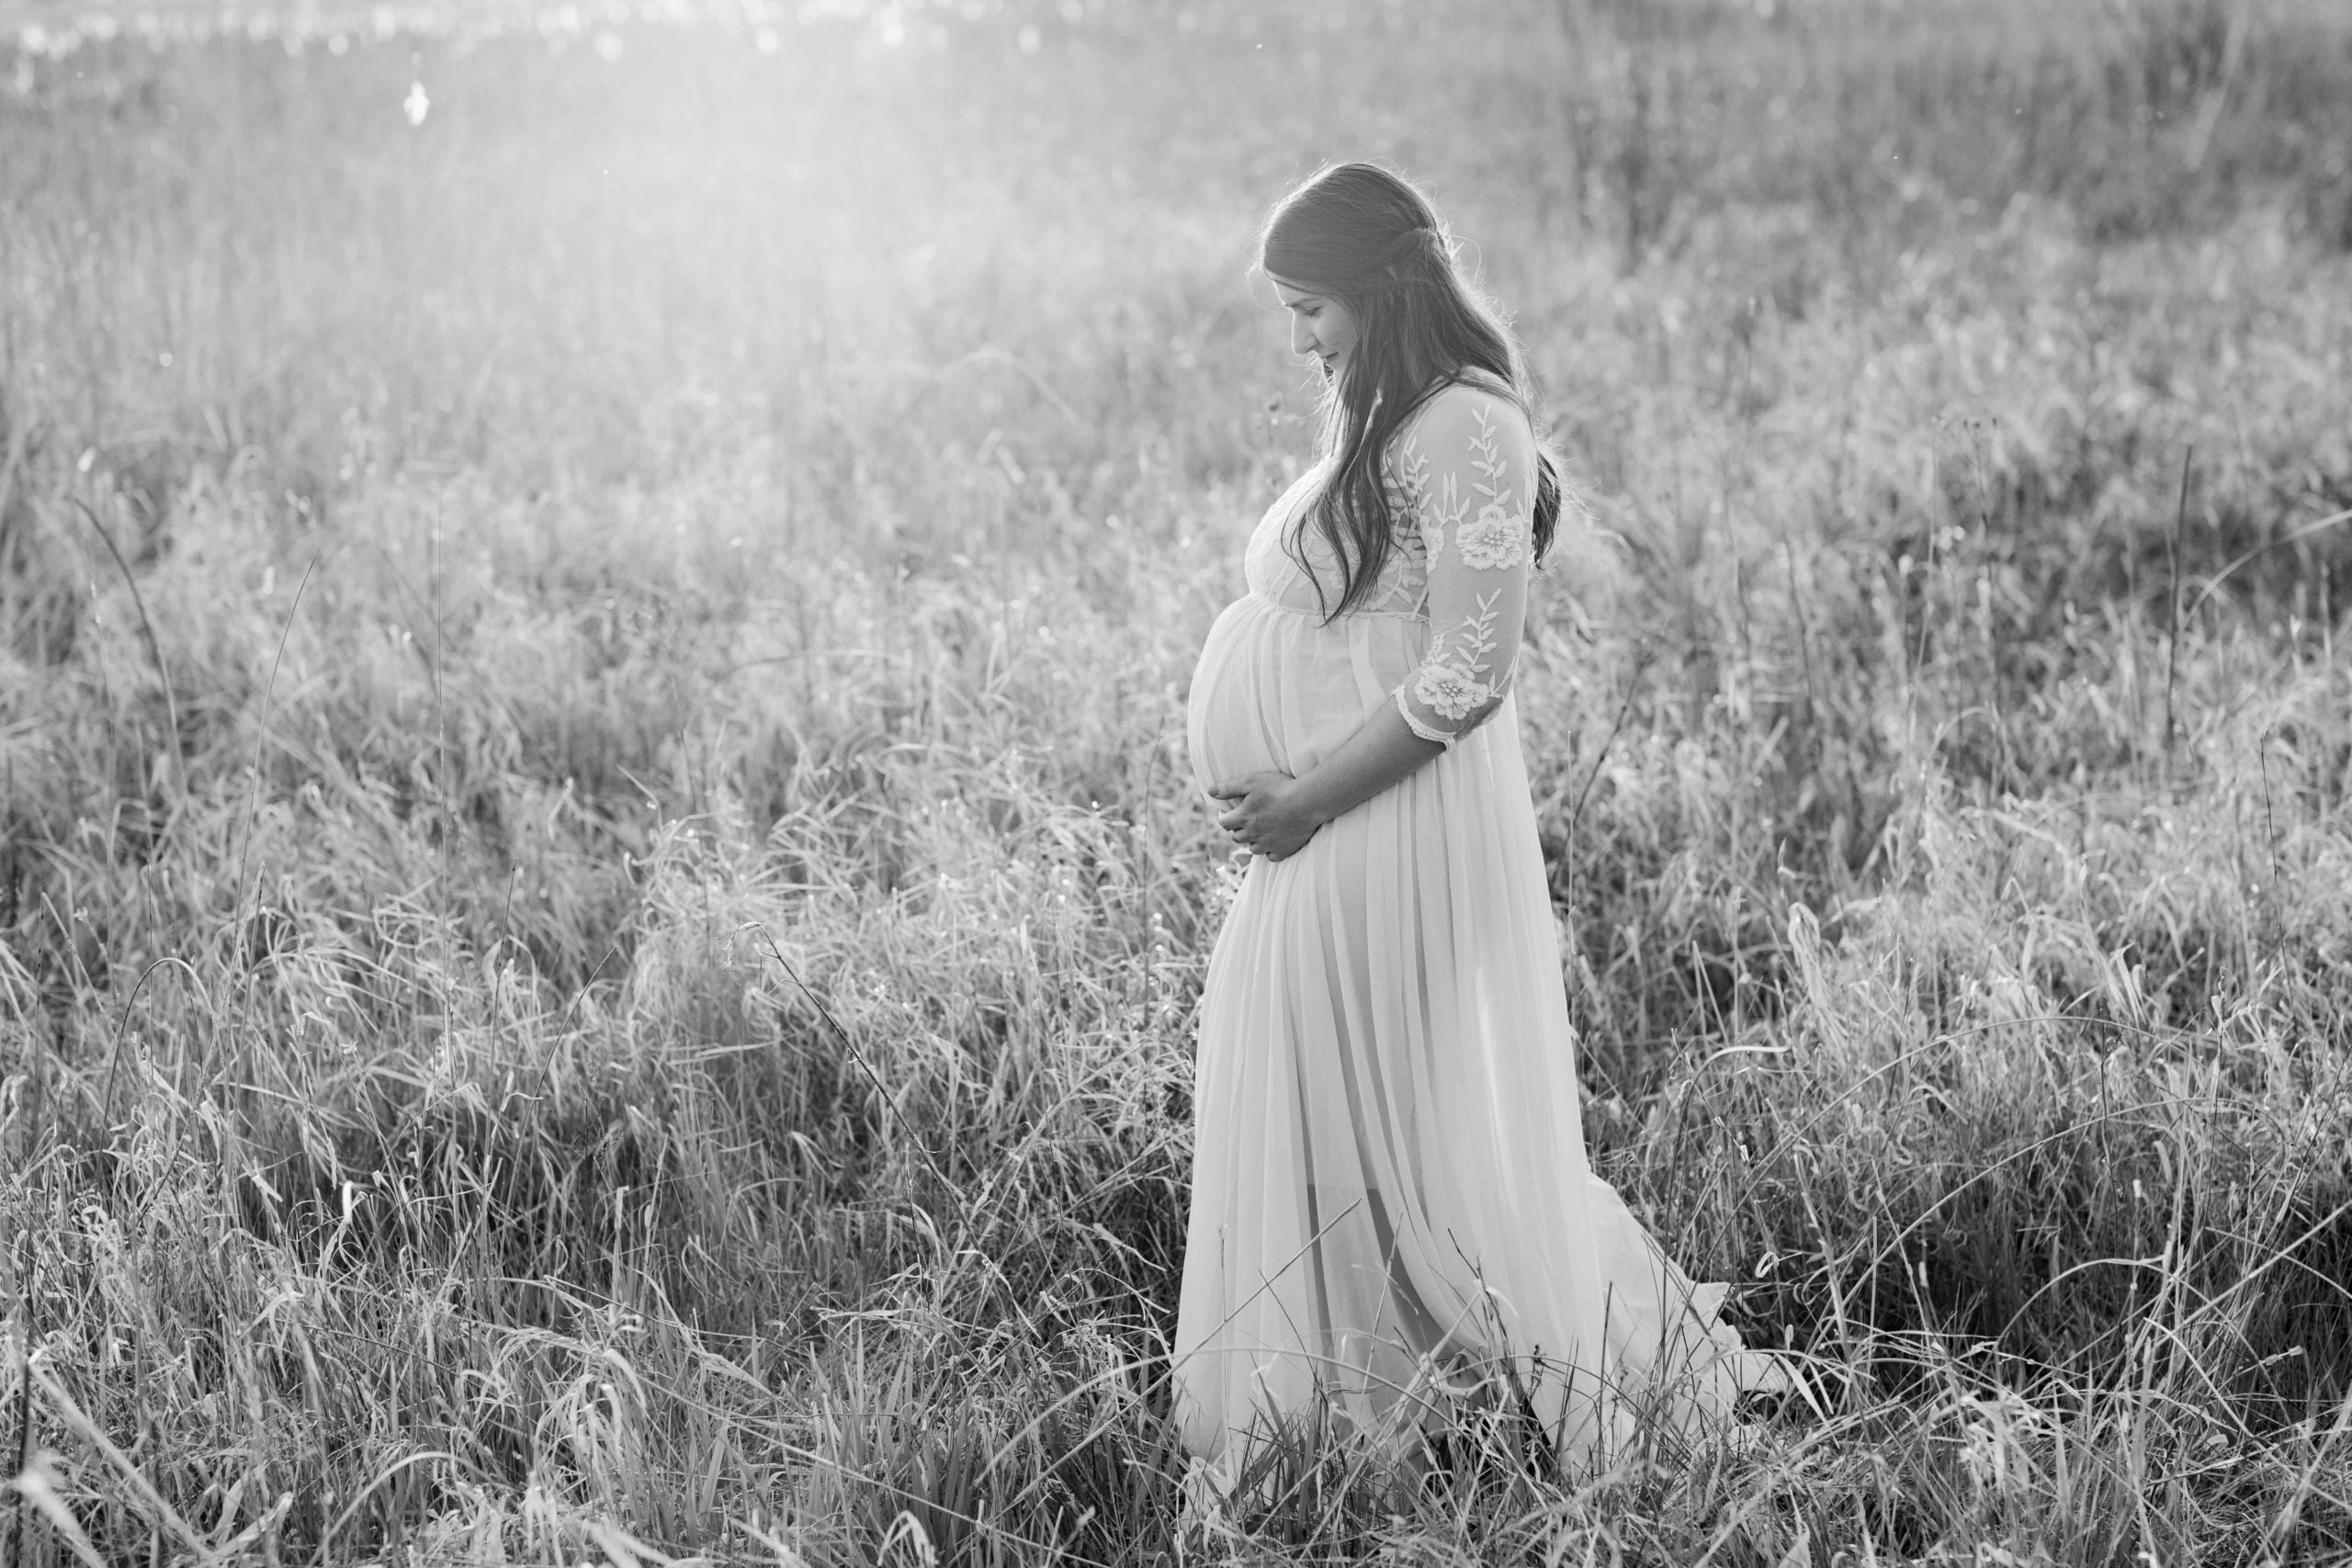 Outdoor Golden Hour Geneva Illinois Maternity Photoshoot black and white in a field